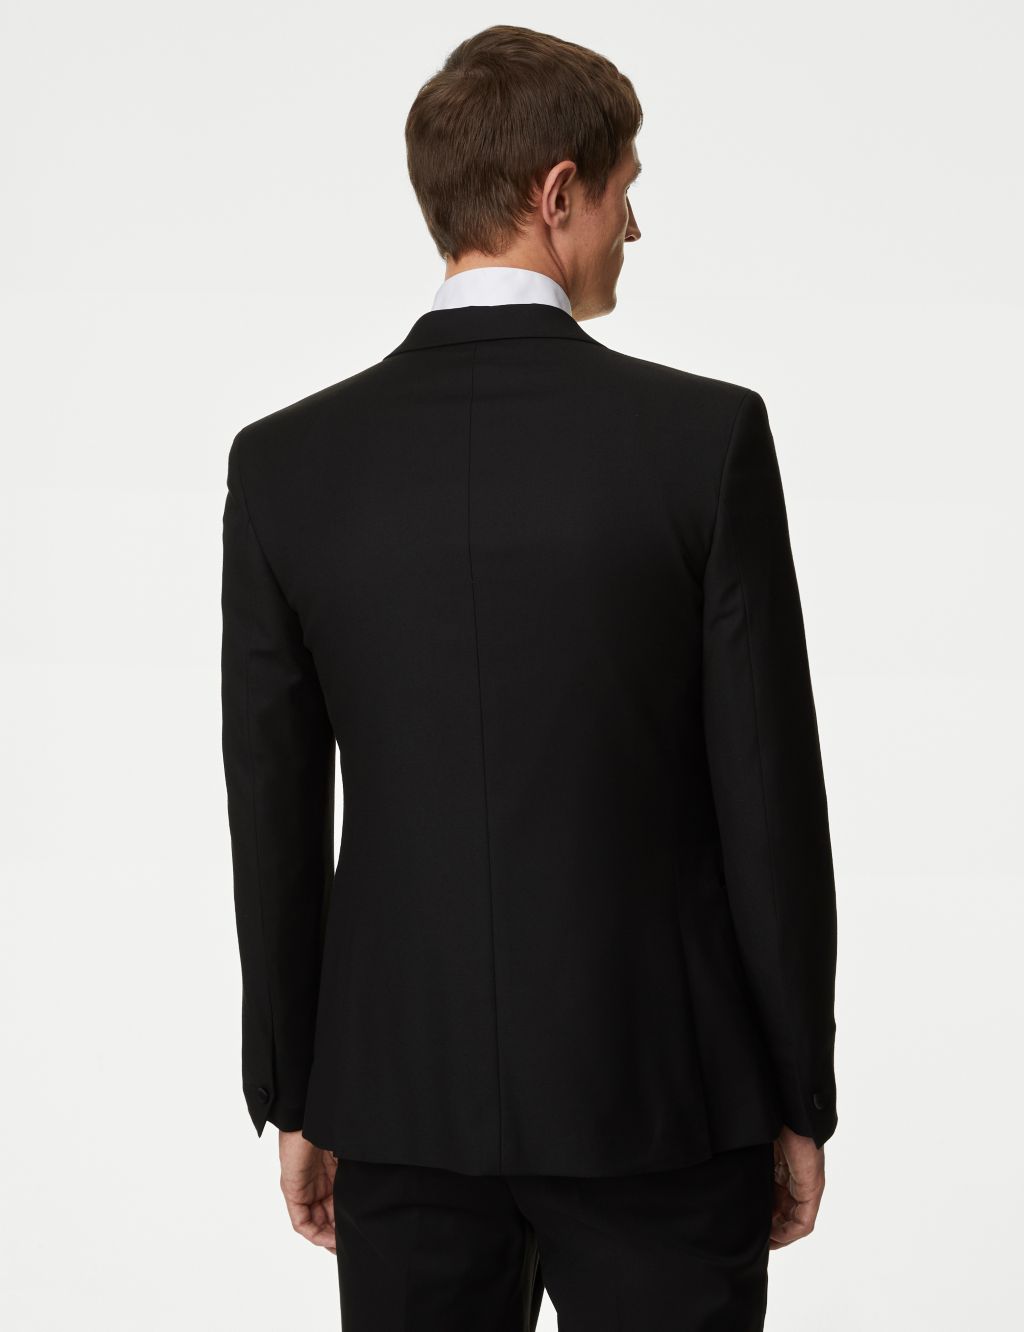 Skinny Fit Stretch Tuxedo Suit image 3